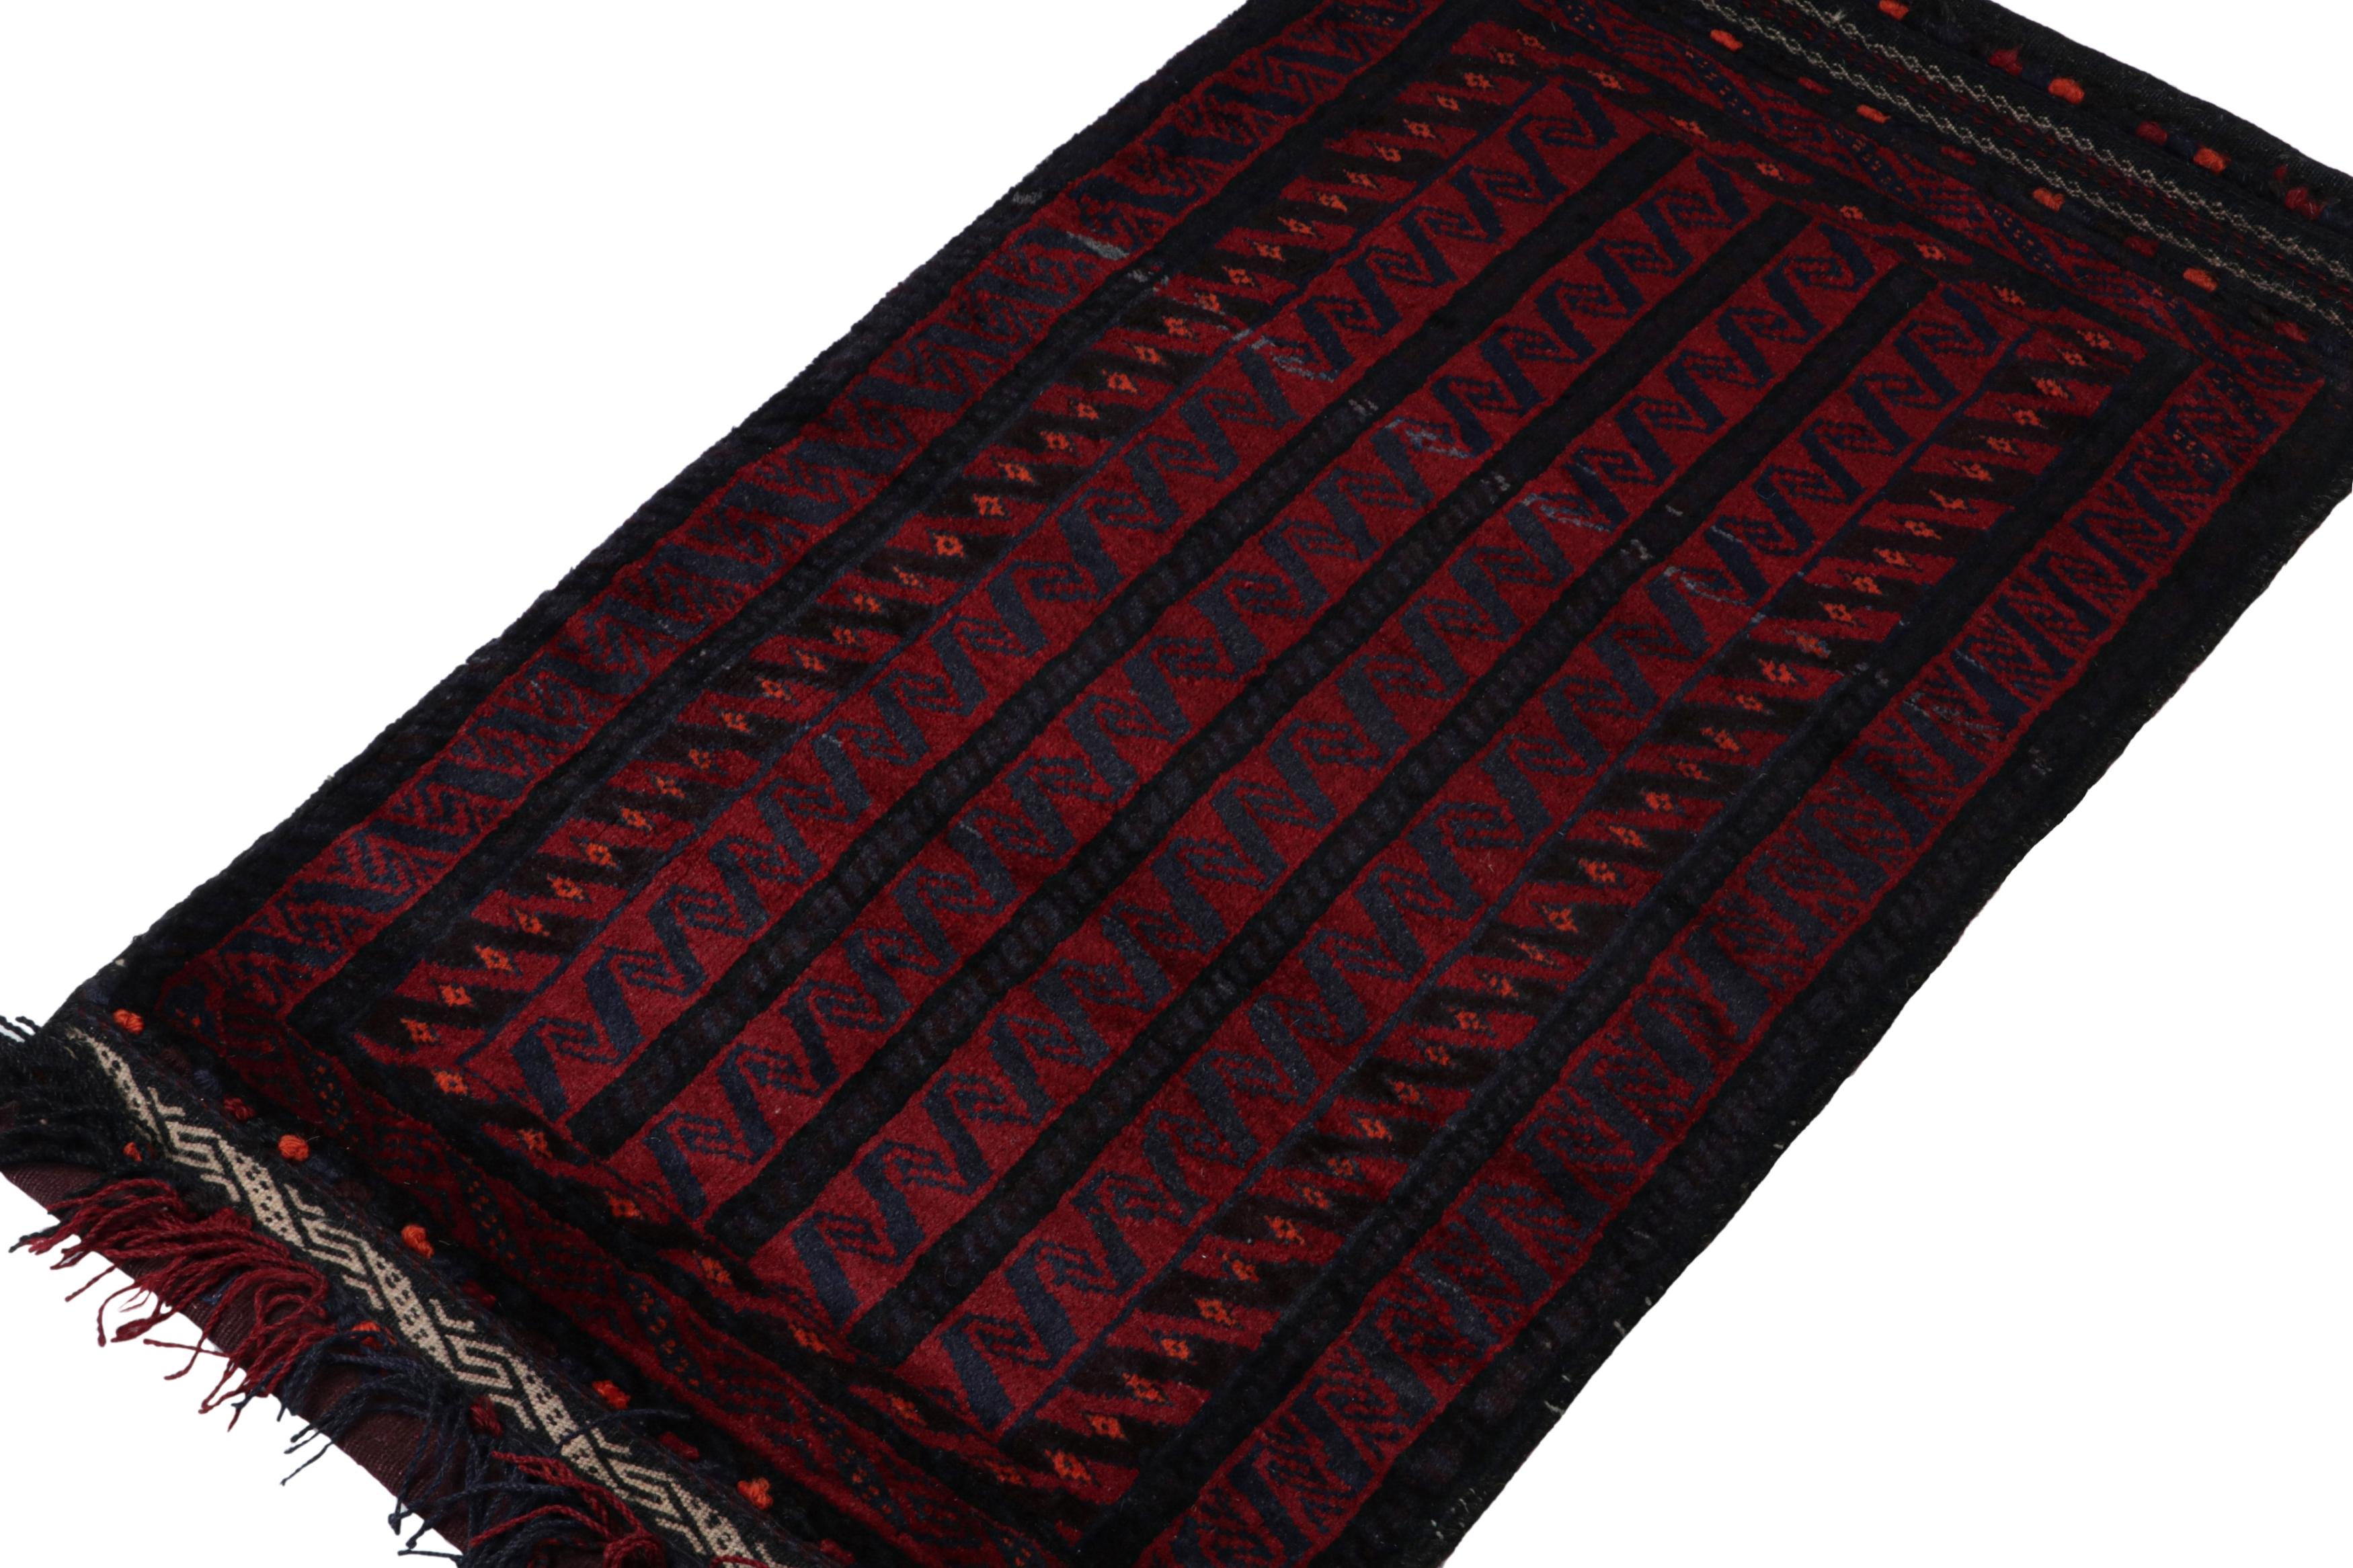 Hand-knotted in wool, this 2x3 Baluch Persian rug of the 1950s is a brand new entry to Rug & Kilim’s Antique & Vintage collection.

On the Design:

The vintage Baluch rug carries tribal patterns in rich tones of red, blue & black. The frame enjoys a